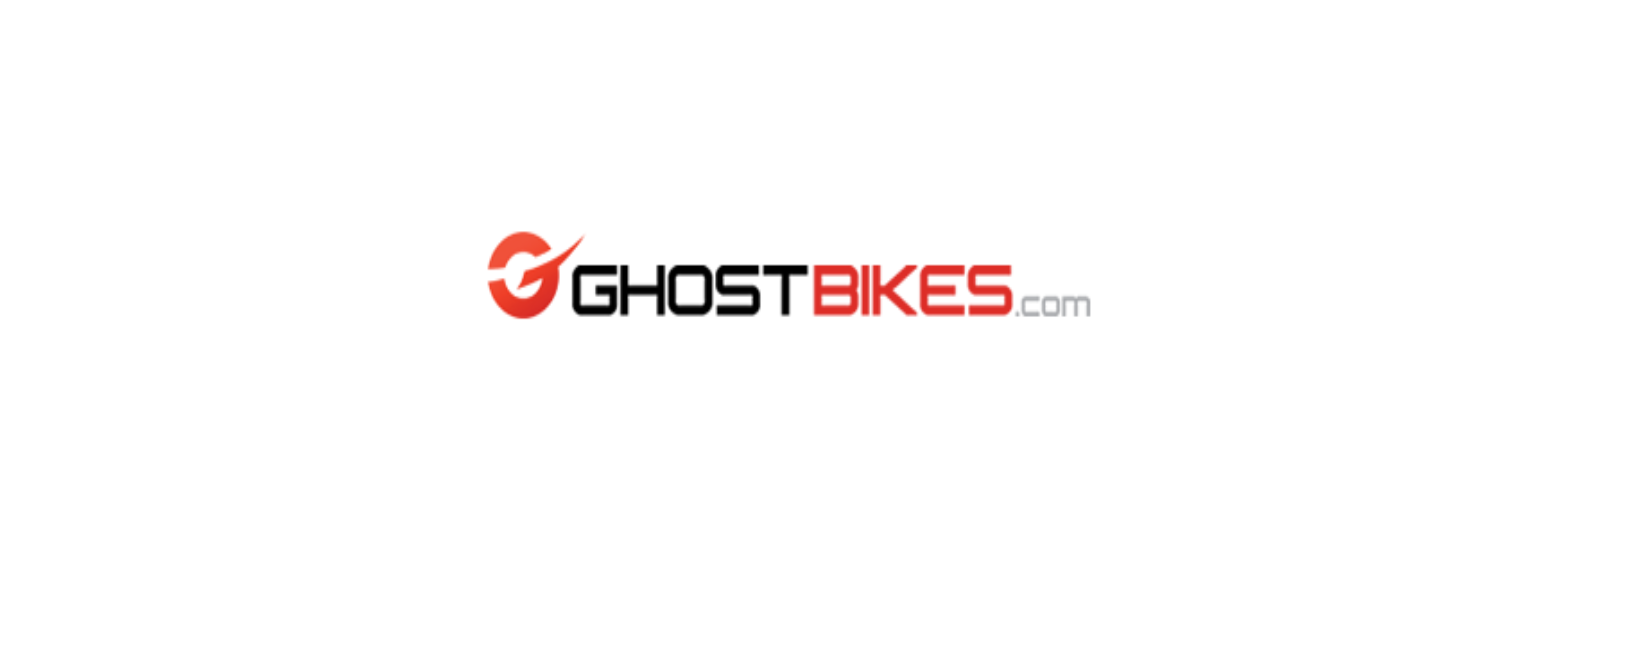 GhostBikes Discount Code 2022